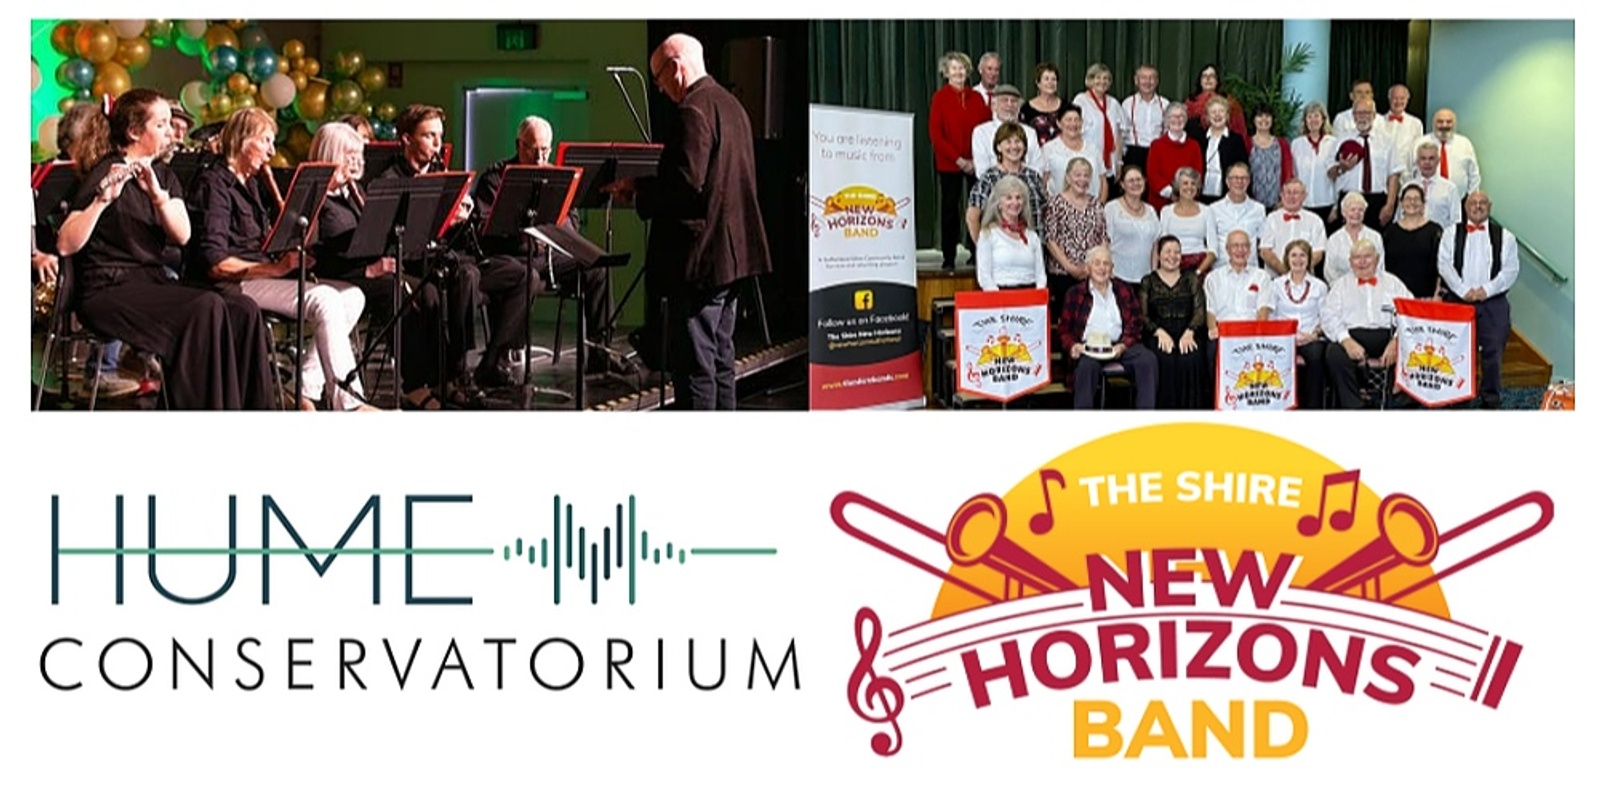 Banner image for Goulburn Concert Band and The Shire New Horizons Band